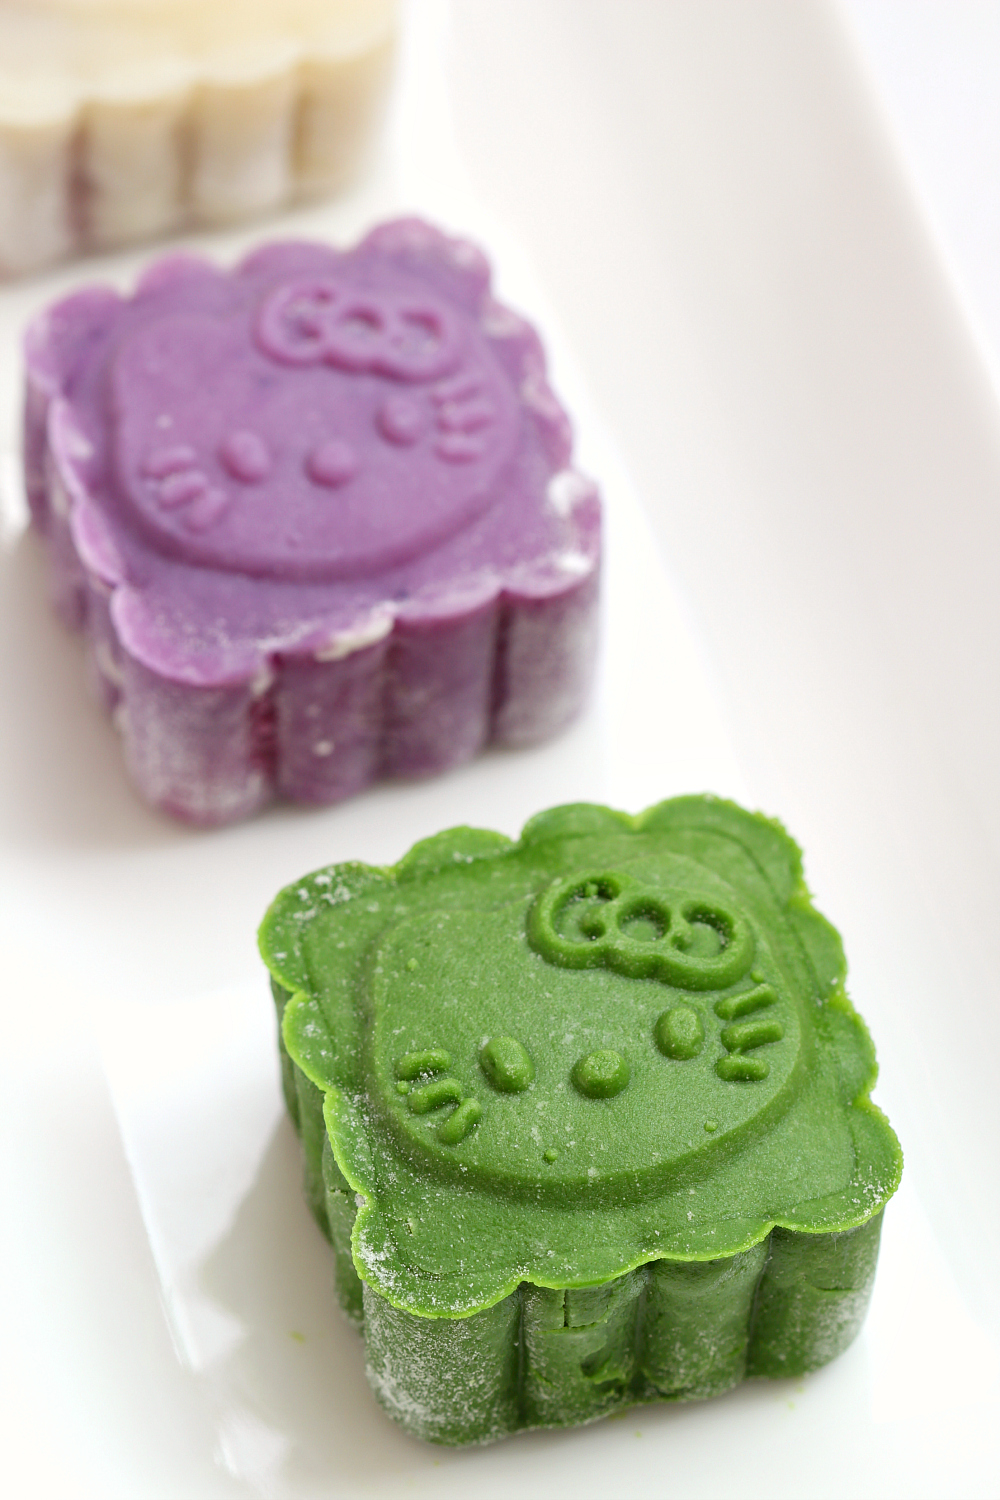 my bare cupboard: Snowskin mooncakes with purple sweet potato and cream ...